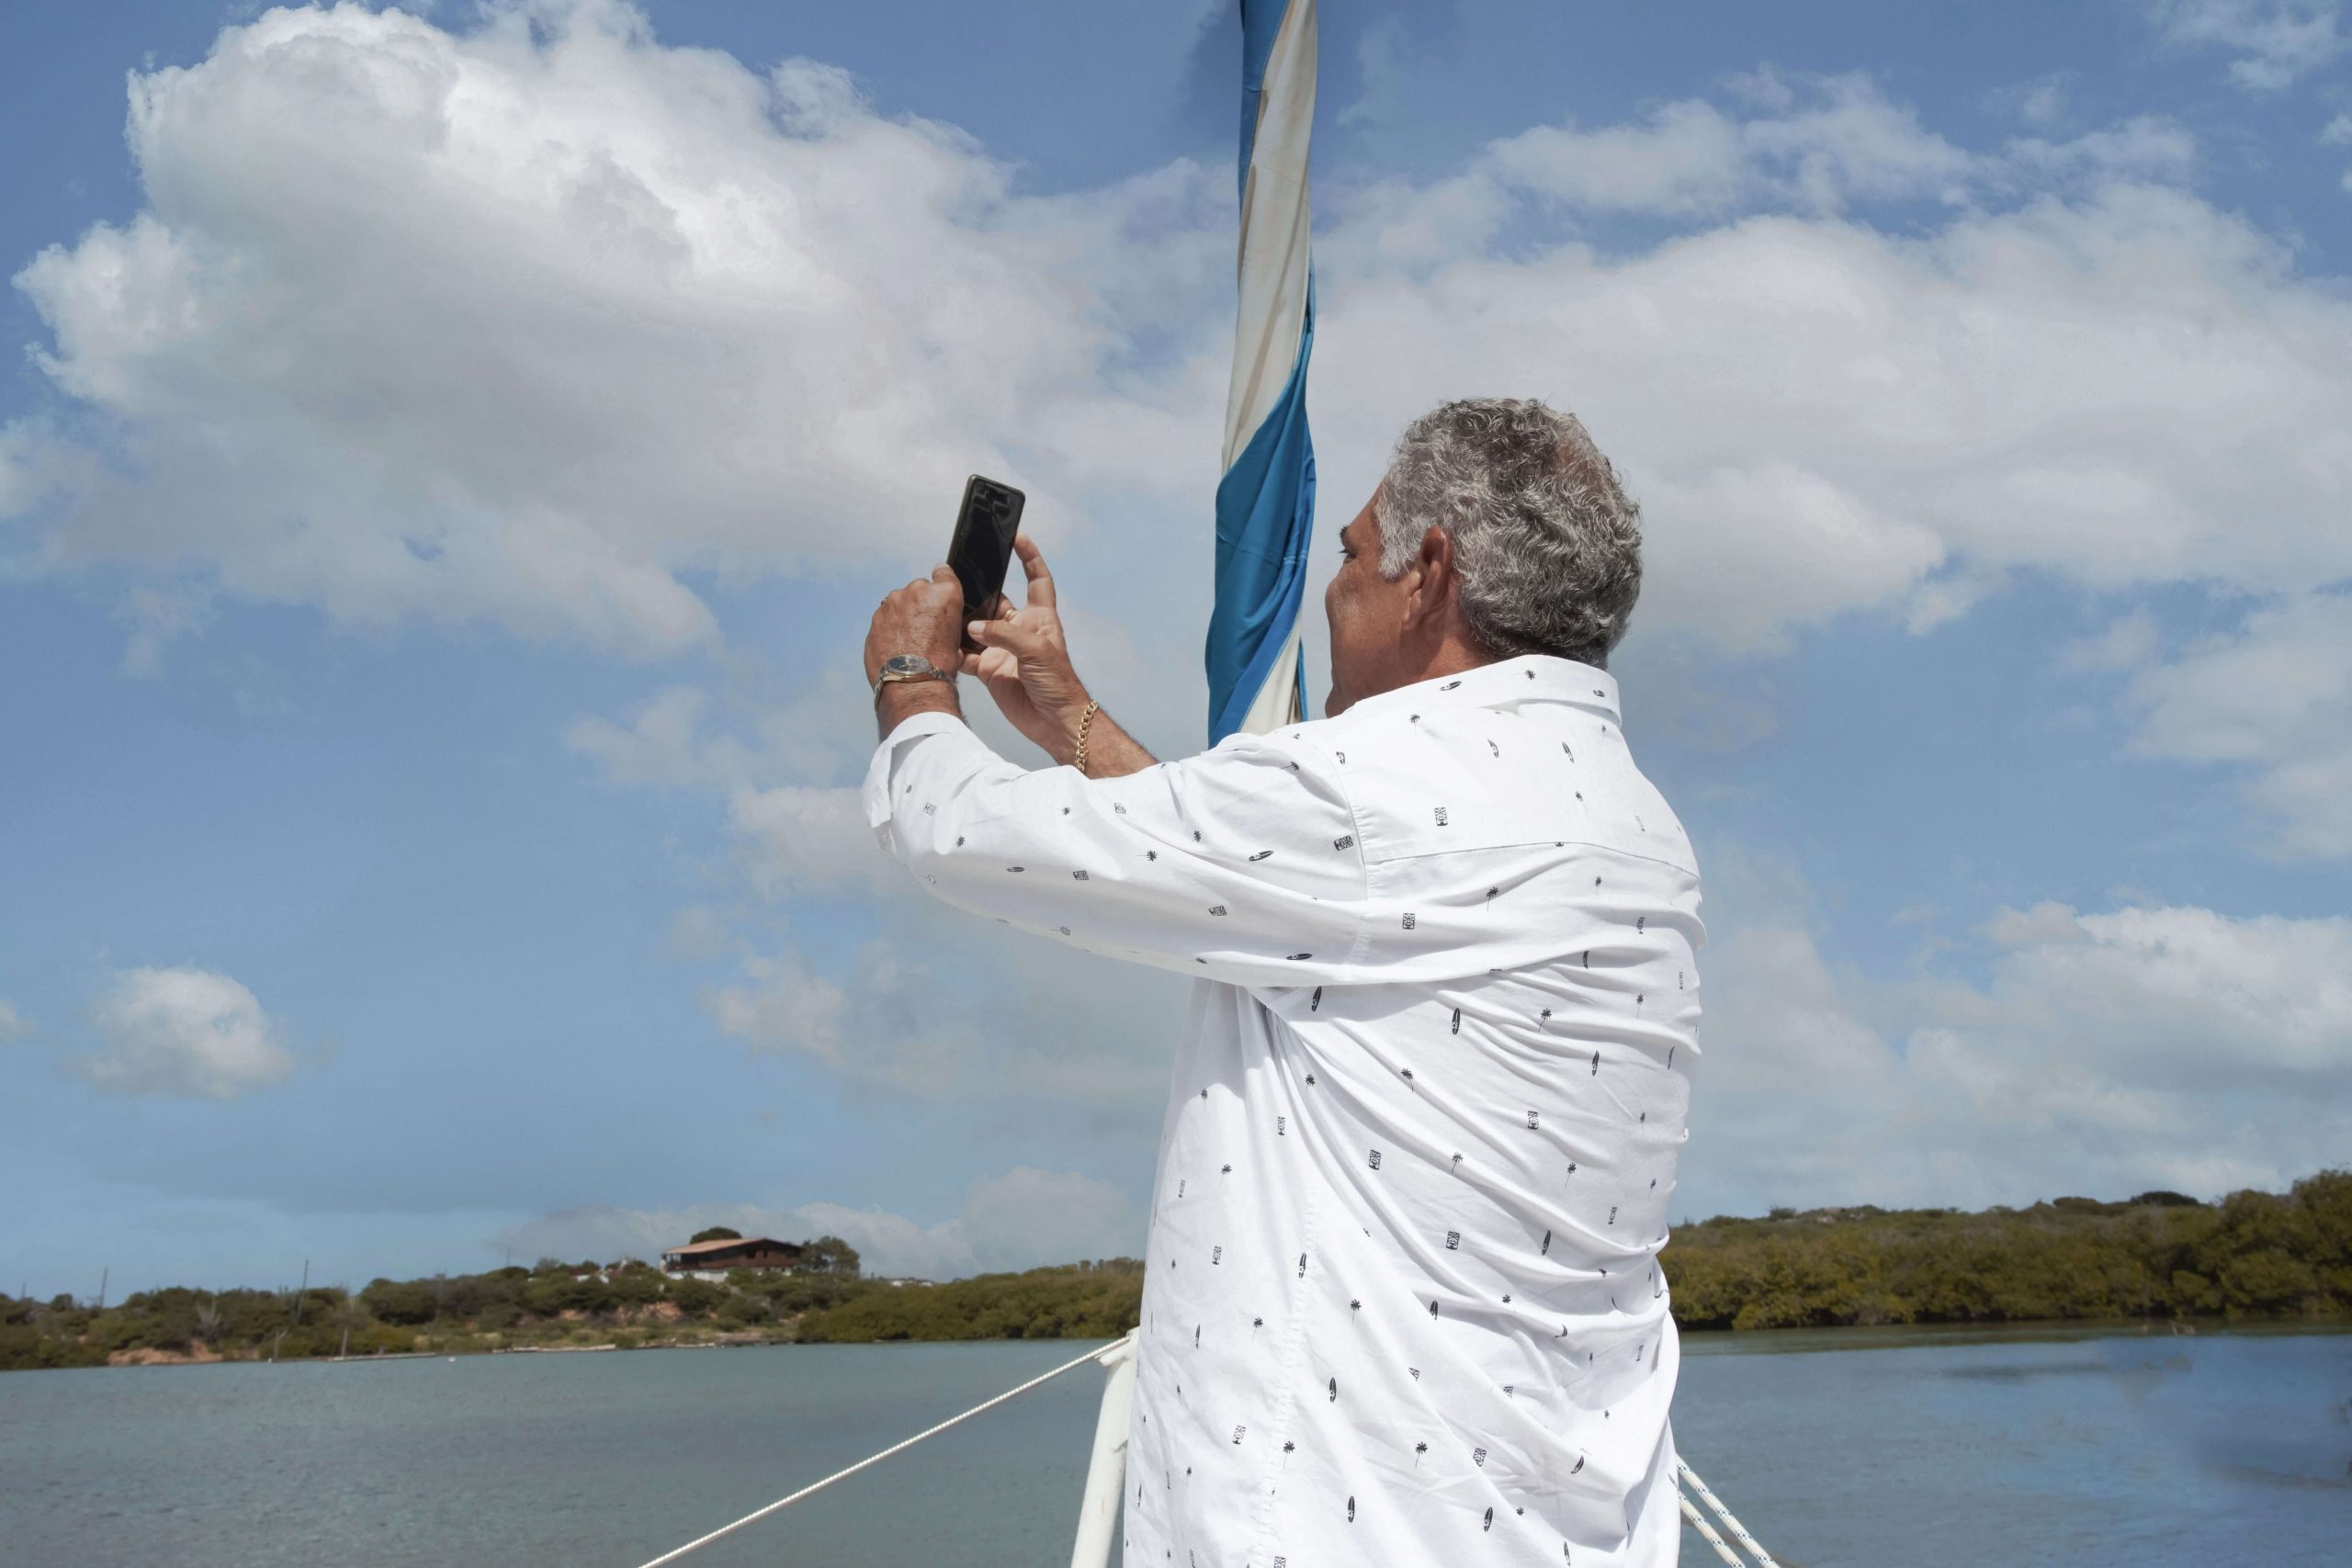 Man holds his phone in front of a boat